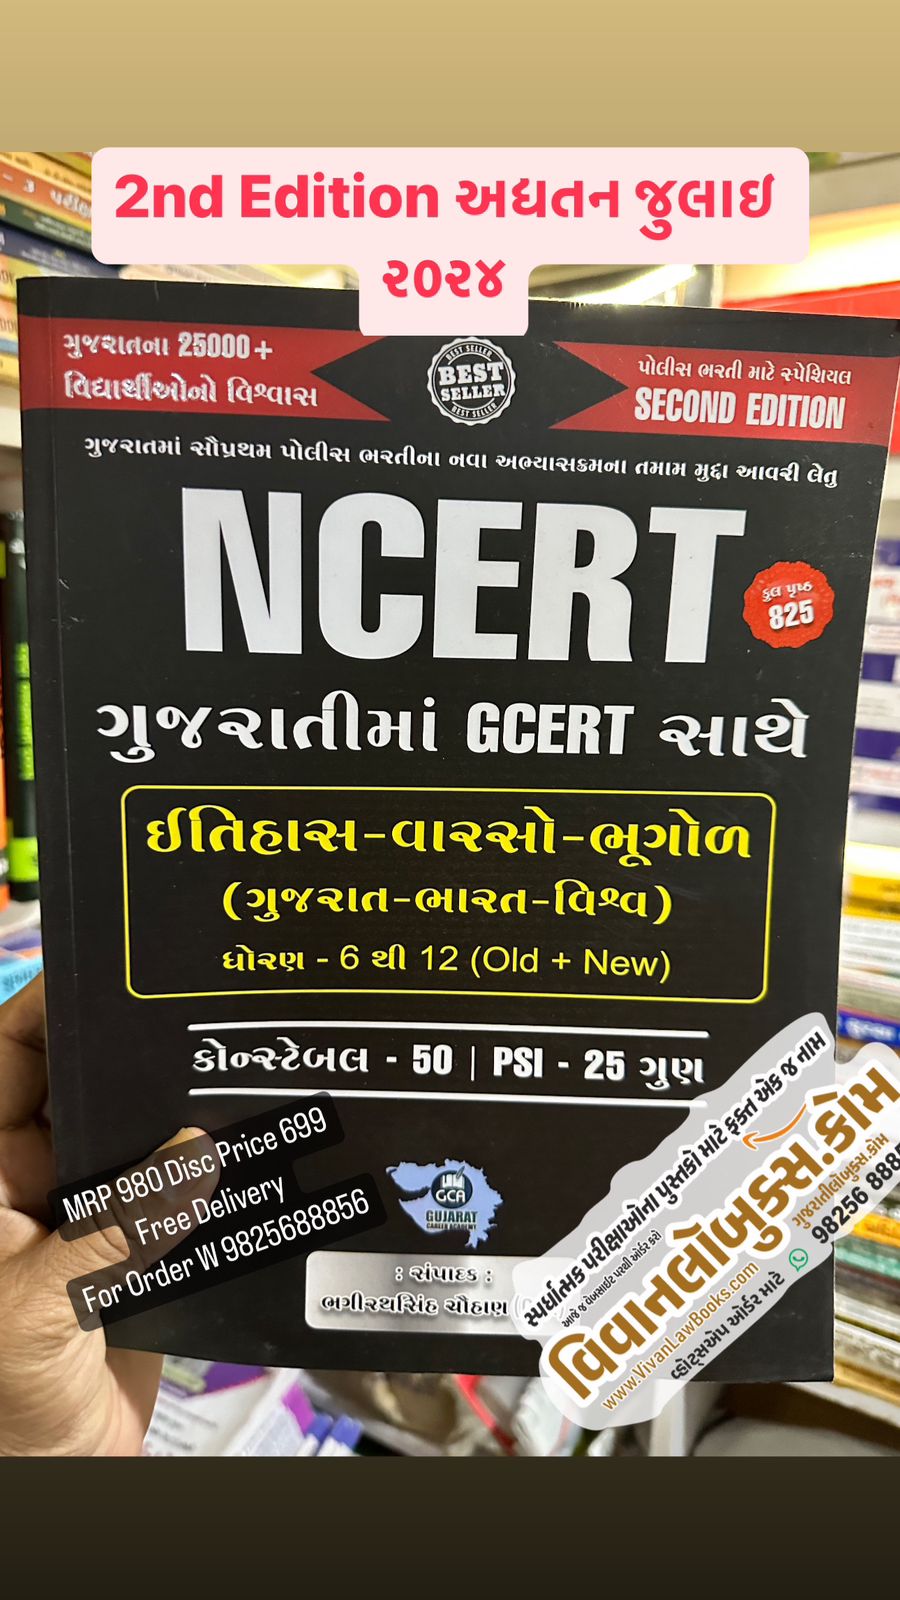 New - NCERT (Itihas I Varso I Bhugol) Dhoran 6 to 12 (Old + New) in Gujarati – ***Latest 2nd Edition July 2024 Edition*** by Bhagirathsingh Chauhan